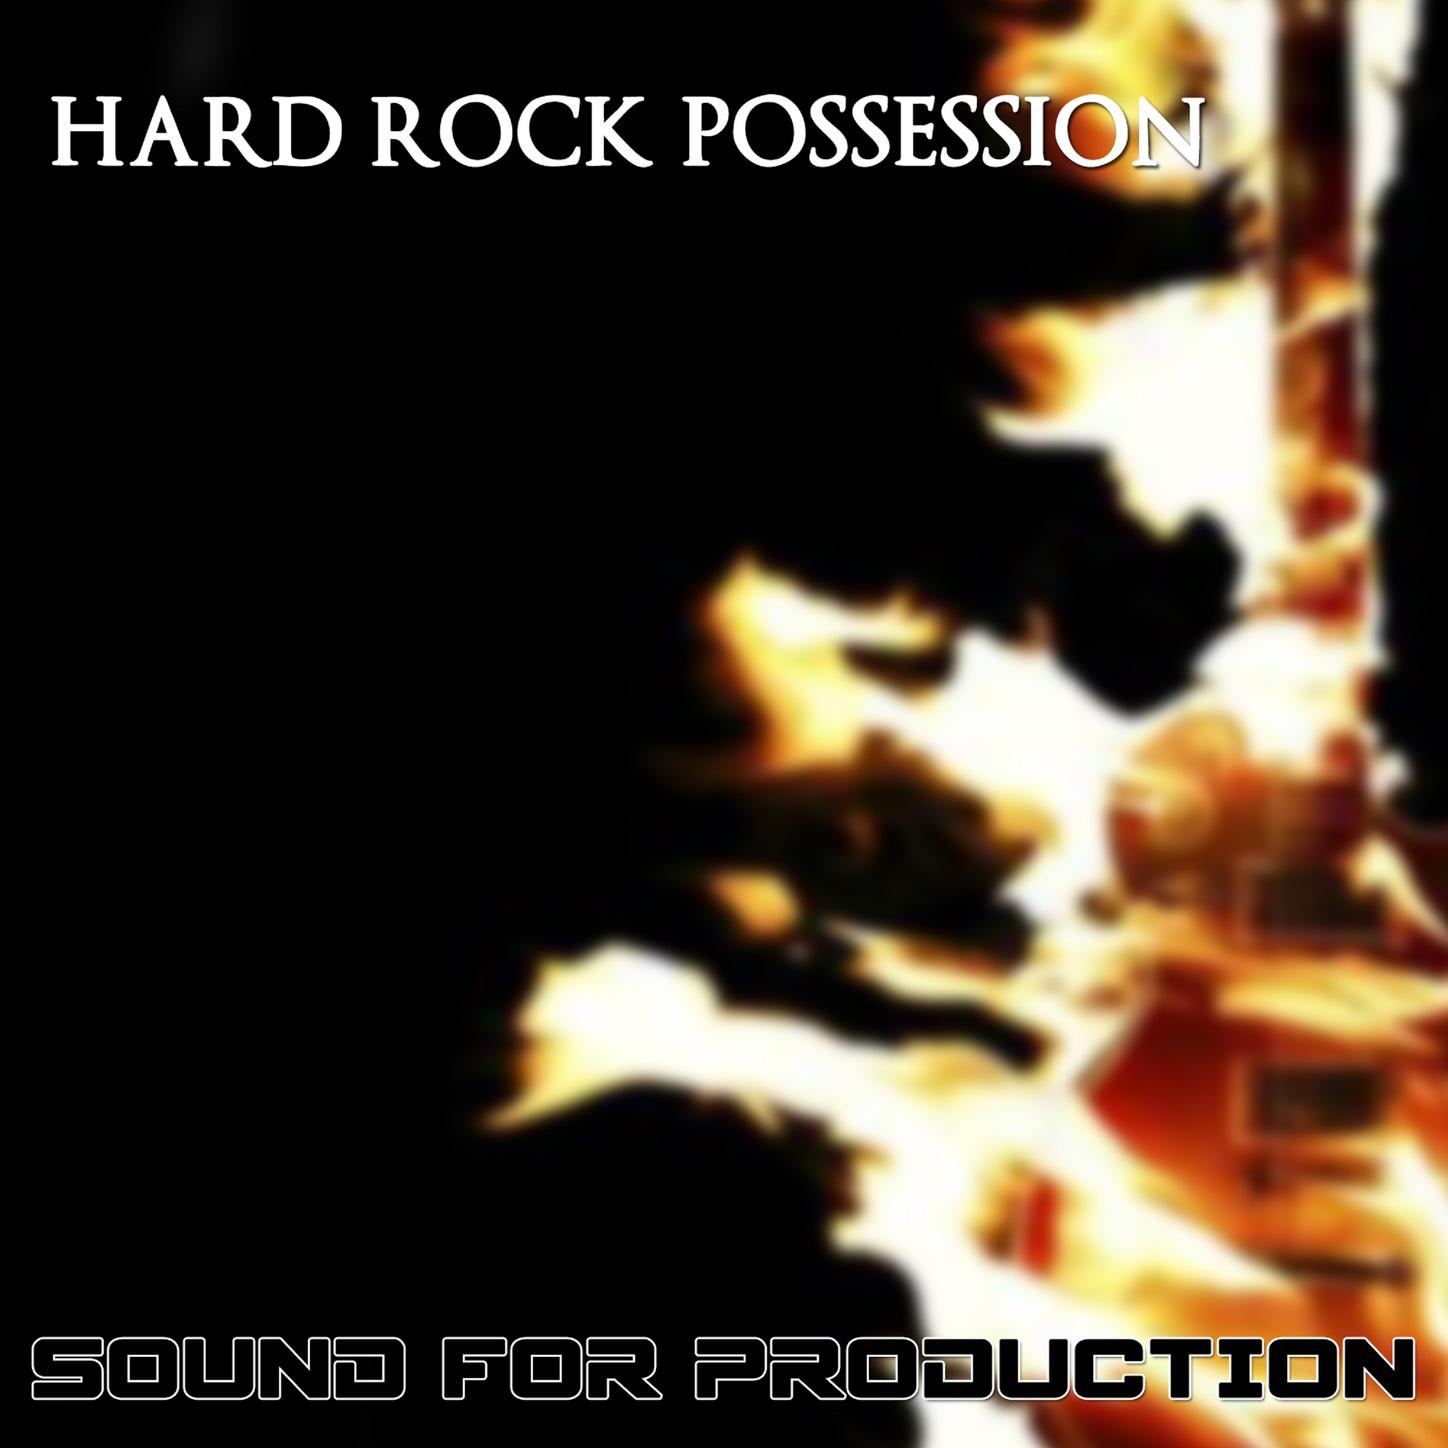 Sound For Production Hard Rock Possession